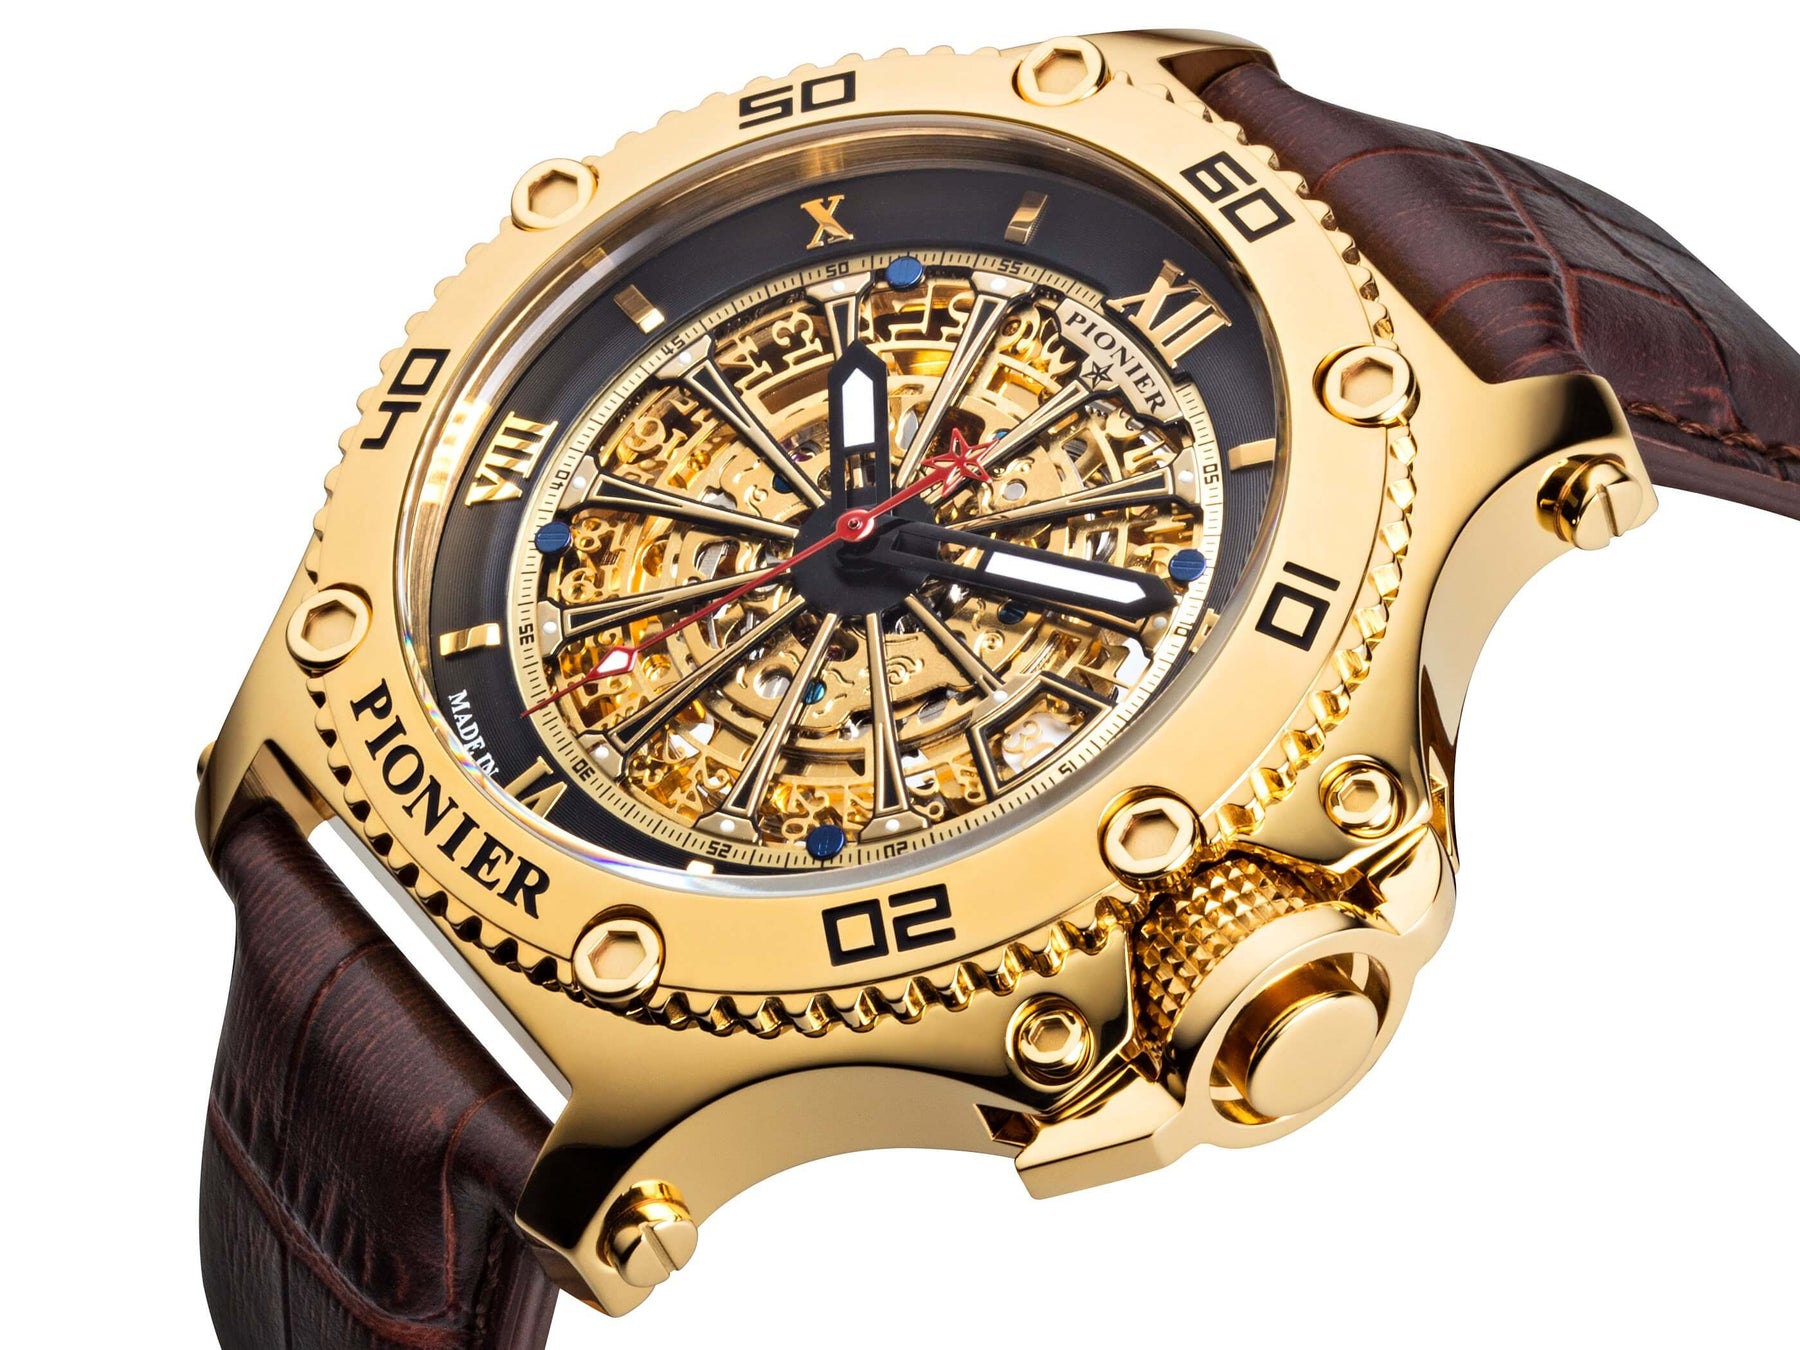 Arabic and Roman numerals mixed with a date function and gold color crown.